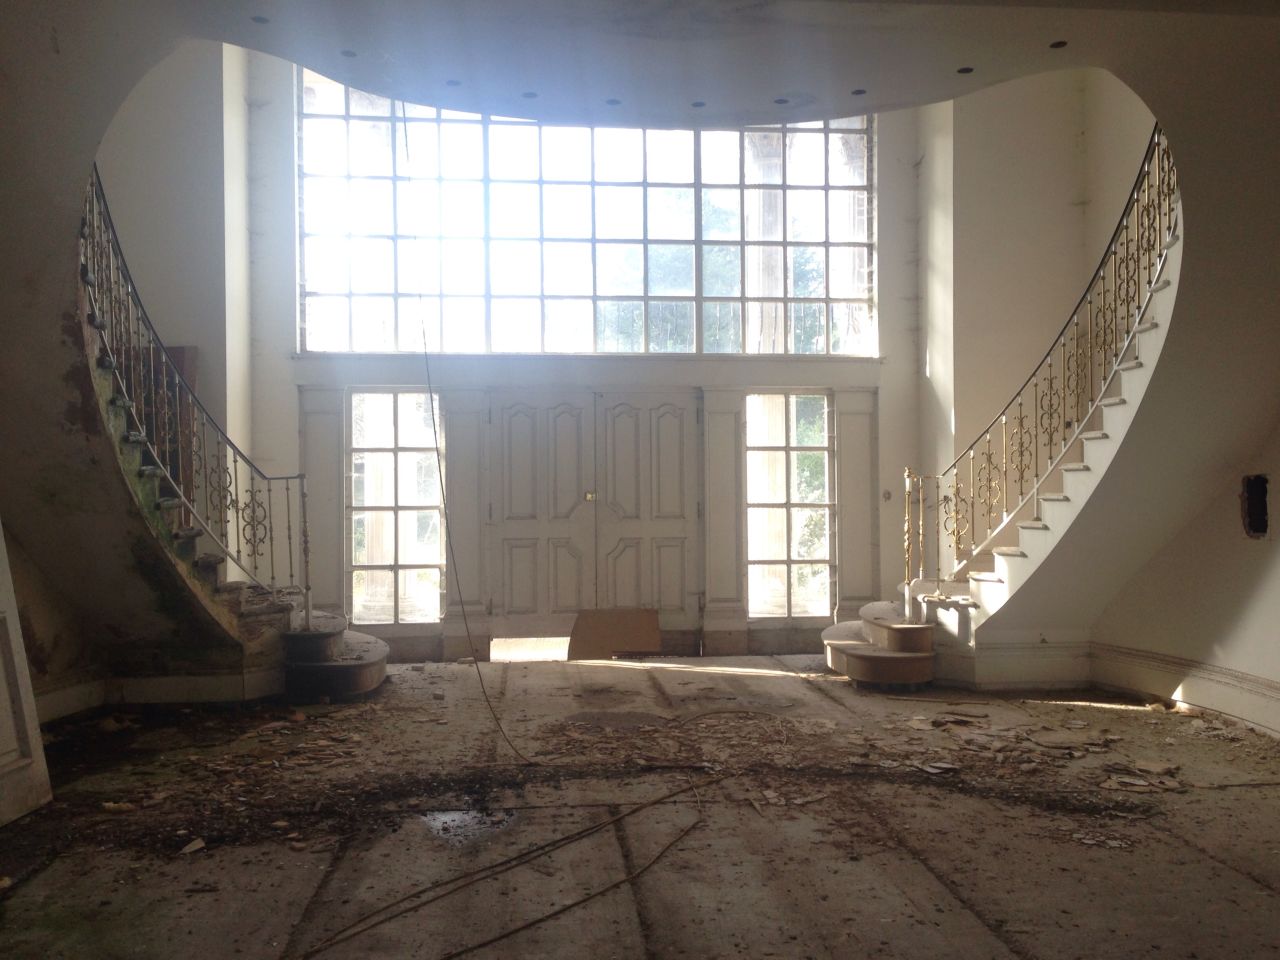 The mansion was never lived in because of planning permission complications. Pictured here is its entrance hall.